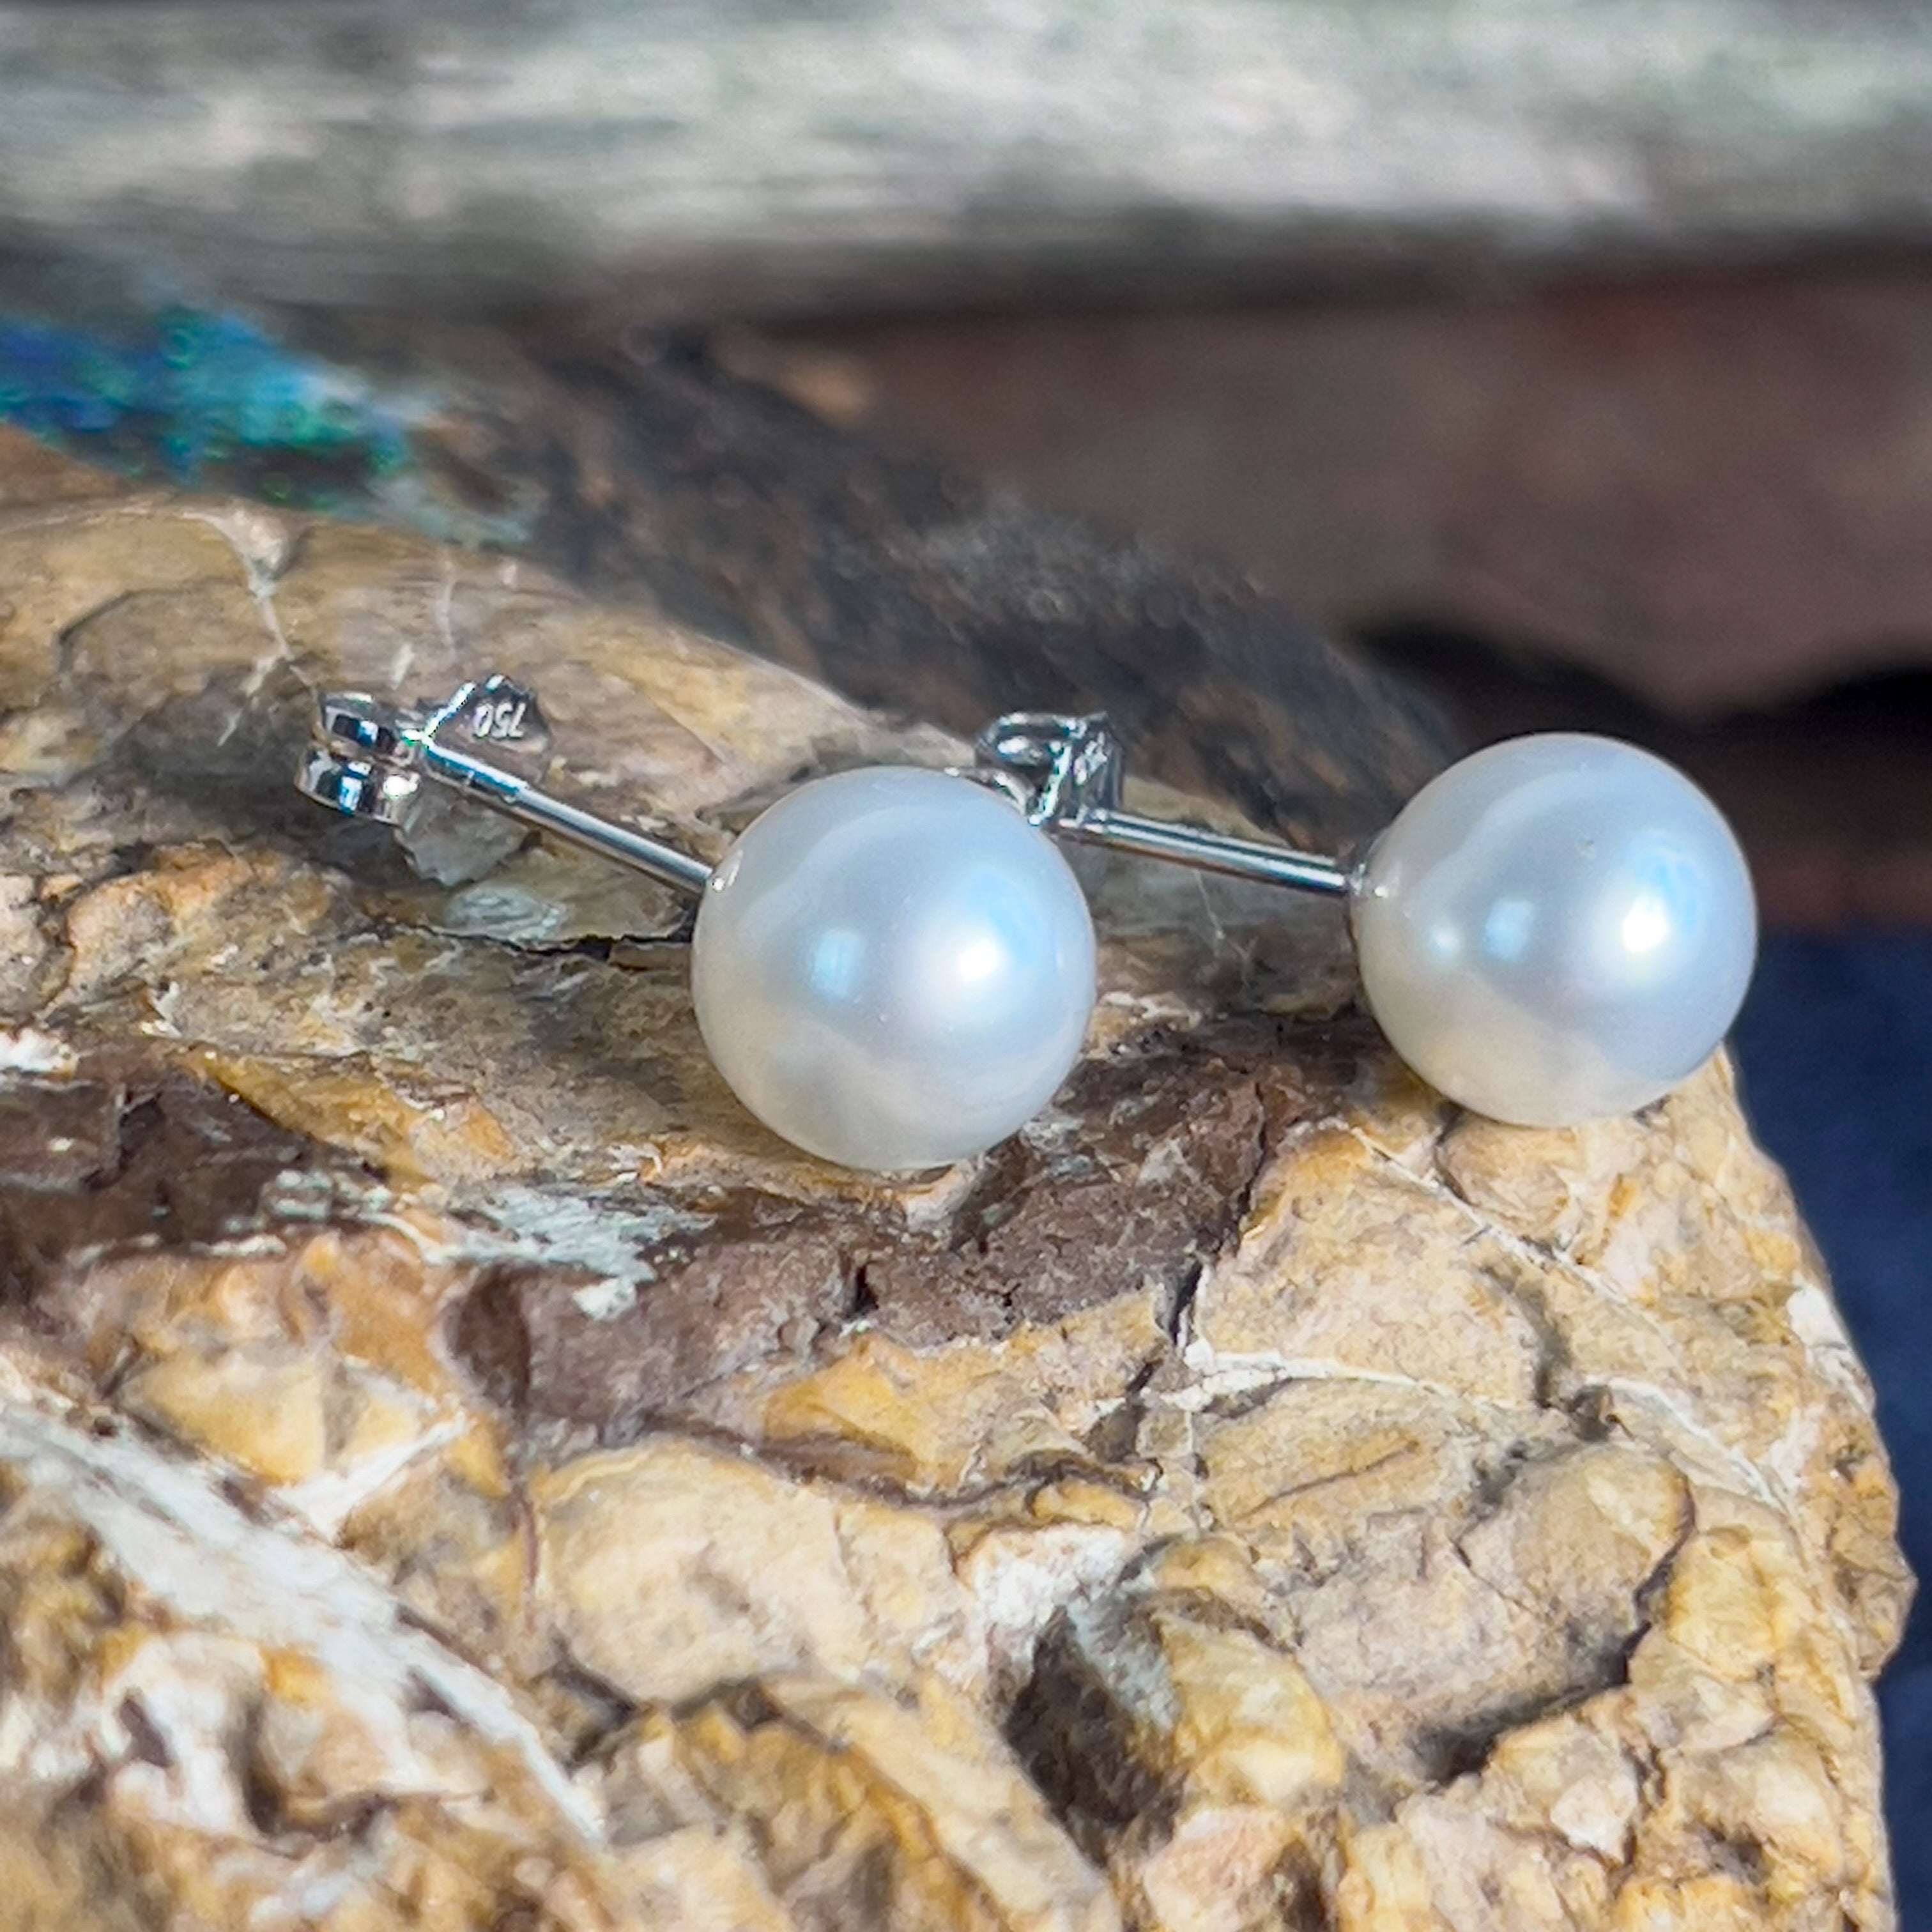 Pair of South Sea Pearls 8-9mm with 18kt White Gold studs - Masterpiece Jewellery Opal & Gems Sydney Australia | Online Shop